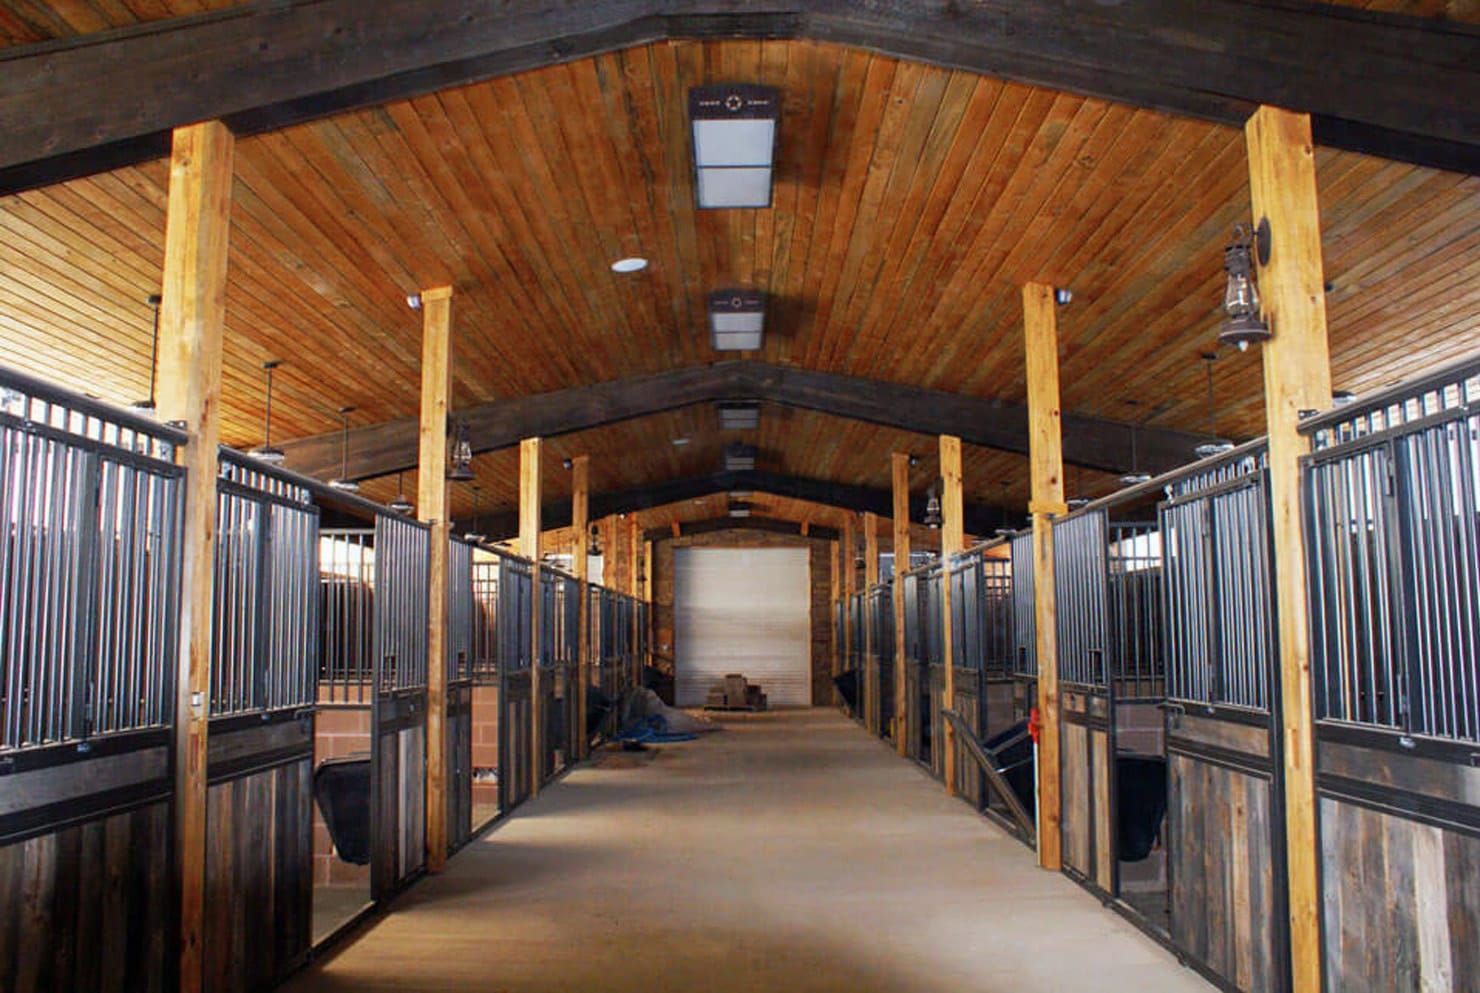 This is an image if a stunning horse stable built by Capital Steel. The interior is lined with wood for a classic, but modern look.